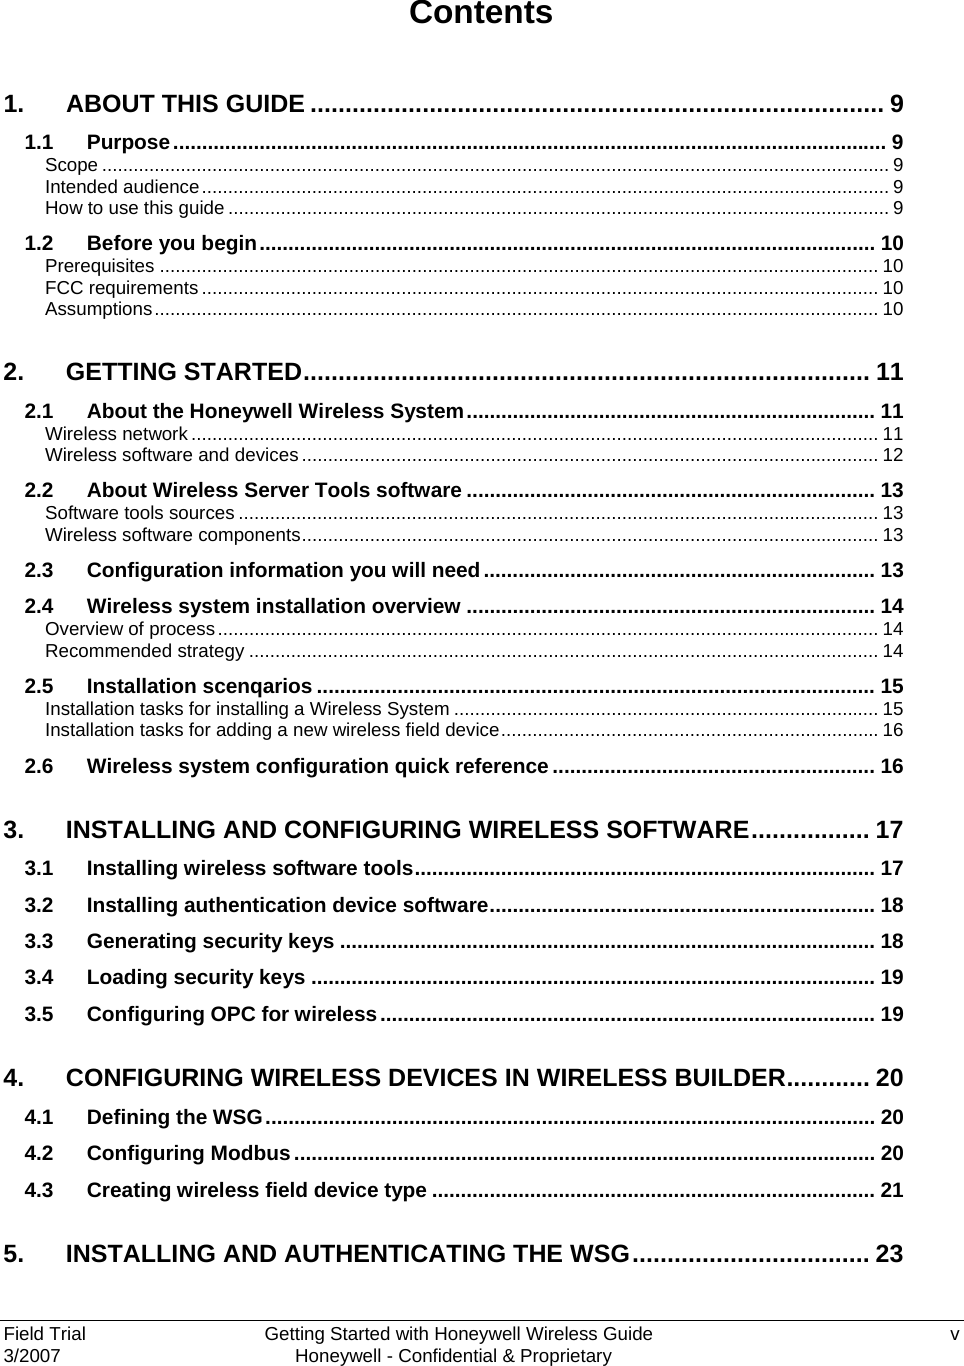  Field Trial      Getting Started with Honeywell Wireless Guide  v 3/2007    Honeywell - Confidential &amp; Proprietary   Contents 1. ABOUT THIS GUIDE .................................................................................. 9 1.1 Purpose............................................................................................................................ 9 Scope ...................................................................................................................................................... 9 Intended audience................................................................................................................................... 9 How to use this guide .............................................................................................................................. 9 1.2 Before you begin........................................................................................................... 10 Prerequisites ......................................................................................................................................... 10 FCC requirements ................................................................................................................................. 10 Assumptions.......................................................................................................................................... 10 2. GETTING STARTED................................................................................. 11 2.1 About the Honeywell Wireless System....................................................................... 11 Wireless network ................................................................................................................................... 11 Wireless software and devices.............................................................................................................. 12 2.2 About Wireless Server Tools software ....................................................................... 13 Software tools sources .......................................................................................................................... 13 Wireless software components.............................................................................................................. 13 2.3 Configuration information you will need.................................................................... 13 2.4 Wireless system installation overview ....................................................................... 14 Overview of process.............................................................................................................................. 14 Recommended strategy ........................................................................................................................ 14 2.5 Installation scenqarios ................................................................................................. 15 Installation tasks for installing a Wireless System ................................................................................. 15 Installation tasks for adding a new wireless field device........................................................................ 16 2.6 Wireless system configuration quick reference ........................................................ 16 3. INSTALLING AND CONFIGURING WIRELESS SOFTWARE................. 17 3.1 Installing wireless software tools................................................................................ 17 3.2 Installing authentication device software................................................................... 18 3.3 Generating security keys ............................................................................................. 18 3.4 Loading security keys .................................................................................................. 19 3.5 Configuring OPC for wireless...................................................................................... 19 4. CONFIGURING WIRELESS DEVICES IN WIRELESS BUILDER............ 20 4.1 Defining the WSG.......................................................................................................... 20 4.2 Configuring Modbus..................................................................................................... 20 4.3 Creating wireless field device type ............................................................................. 21 5. INSTALLING AND AUTHENTICATING THE WSG.................................. 23 